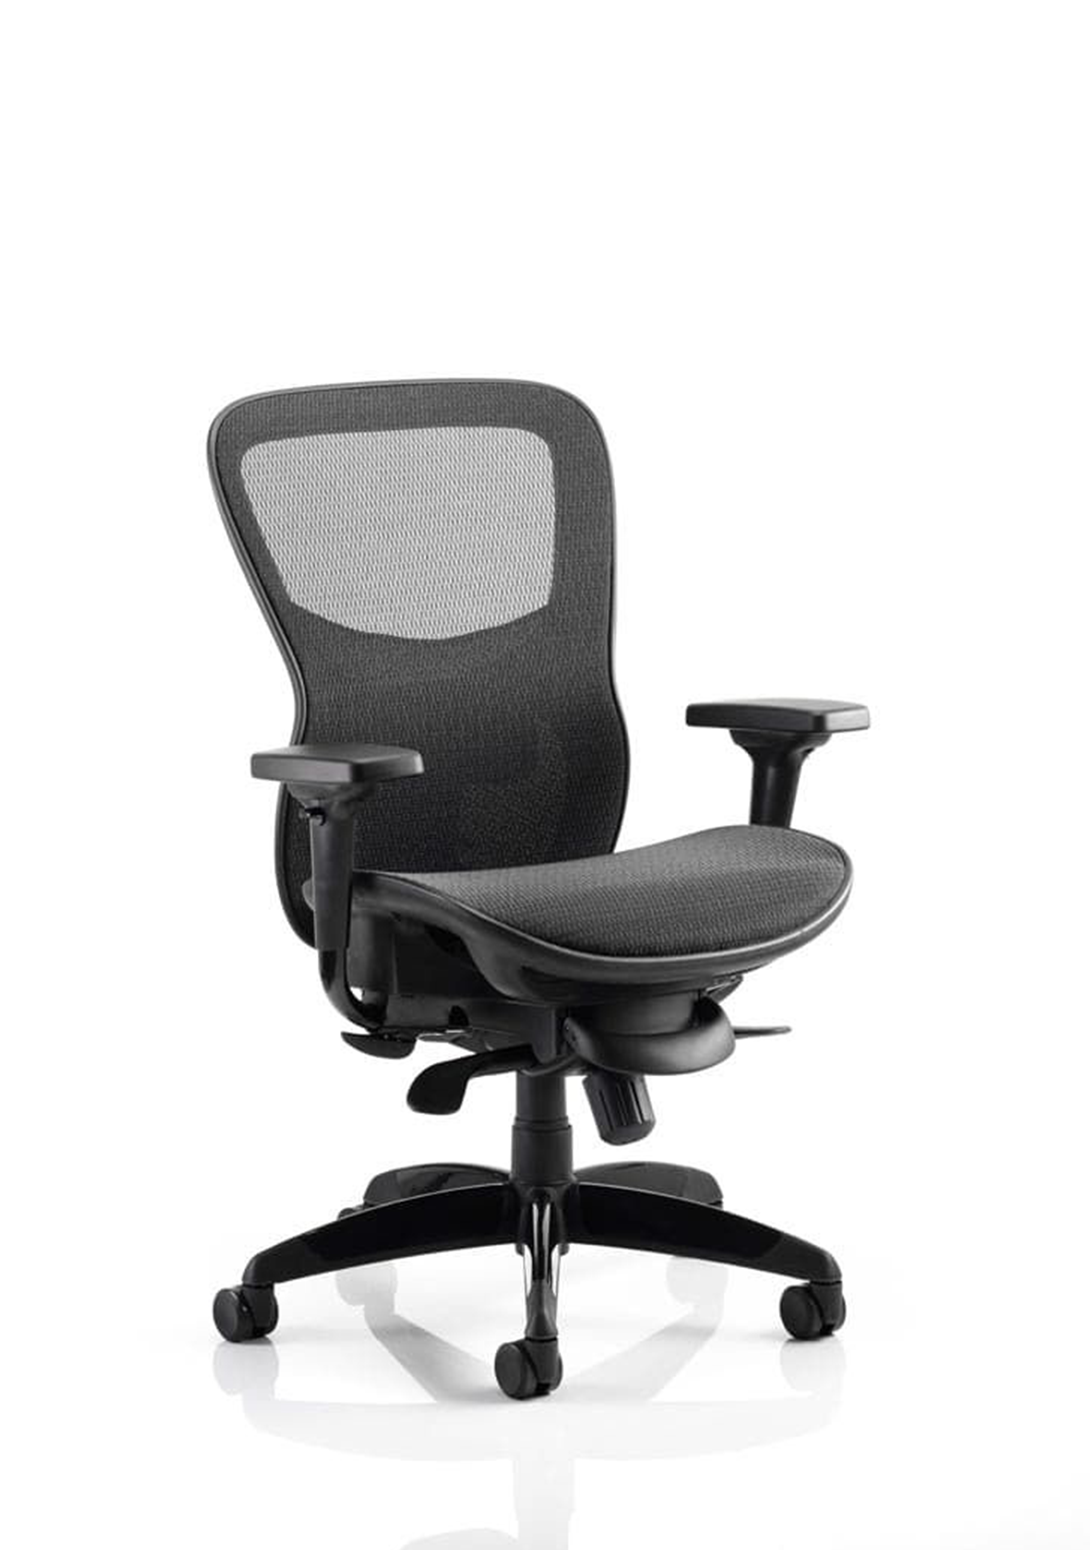 Stealth Posture Chair Home Office Chair | Posture Chair | Home Office Furniture | Combat poor posture | Chair that helps with posture | Ergonomic Office Furniture